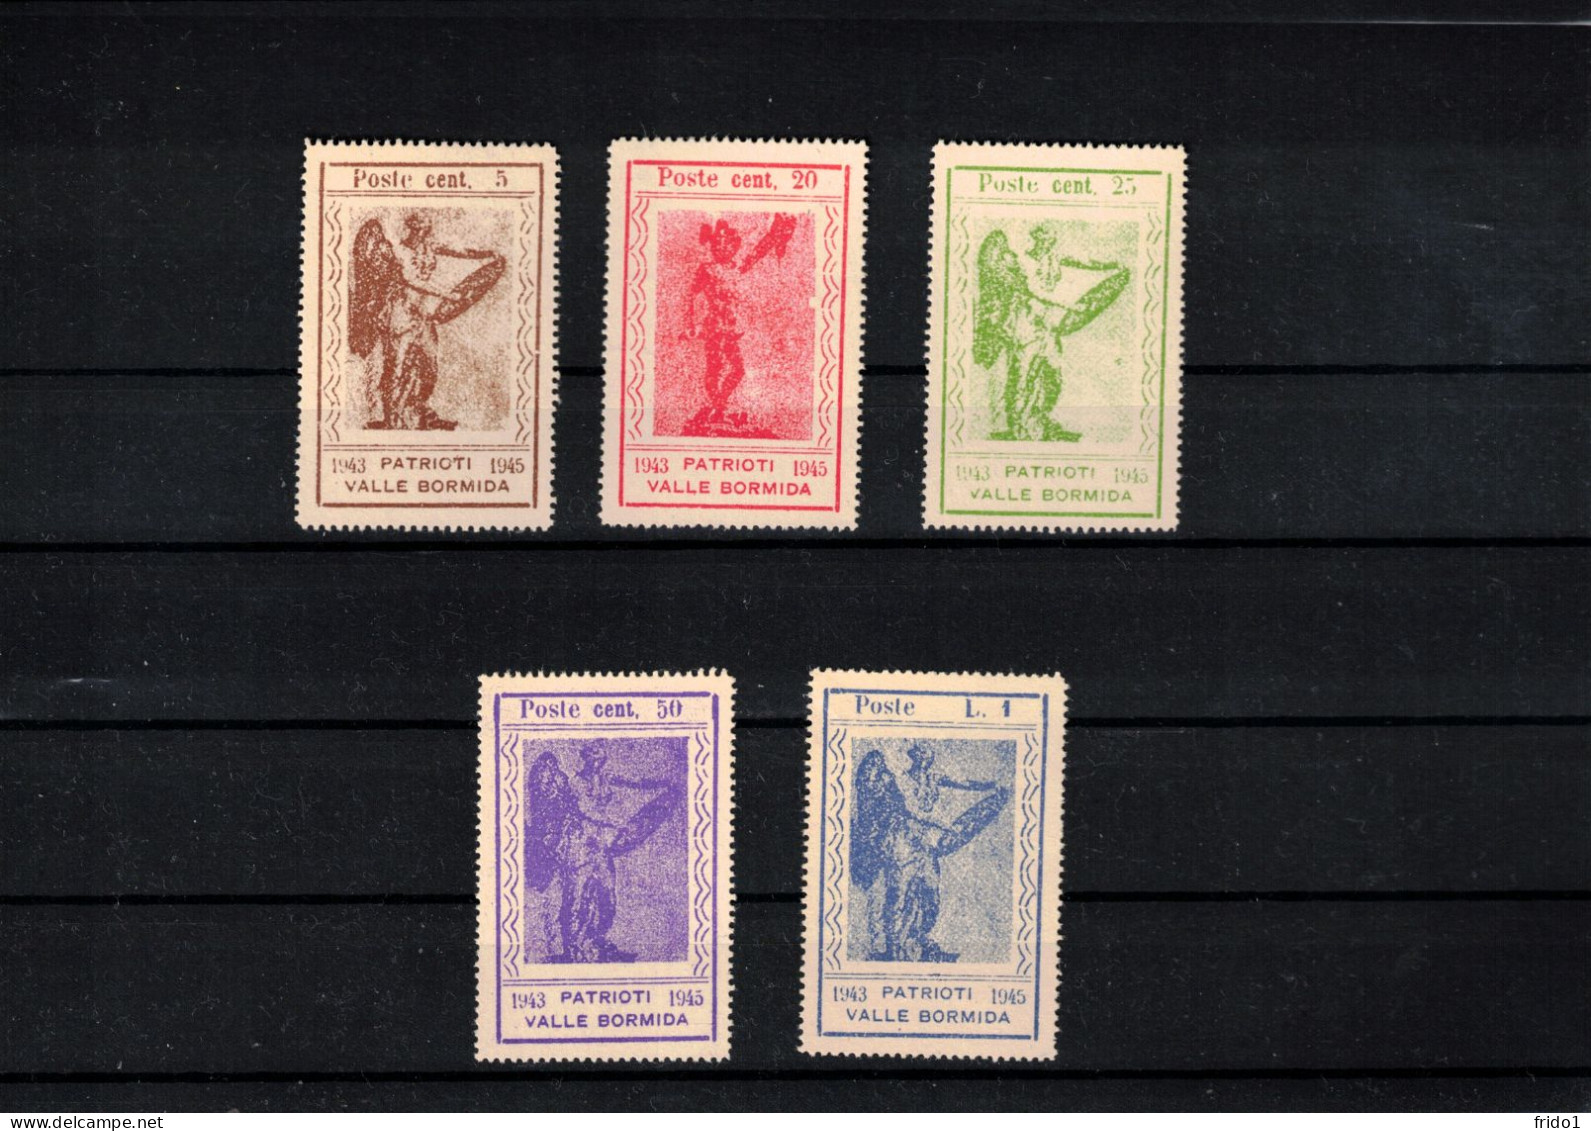 Italy / Italia 1945 Regno D'Italia Valle Bormida Part Of Set Stamps Without Gum As Issued - Mint/hinged